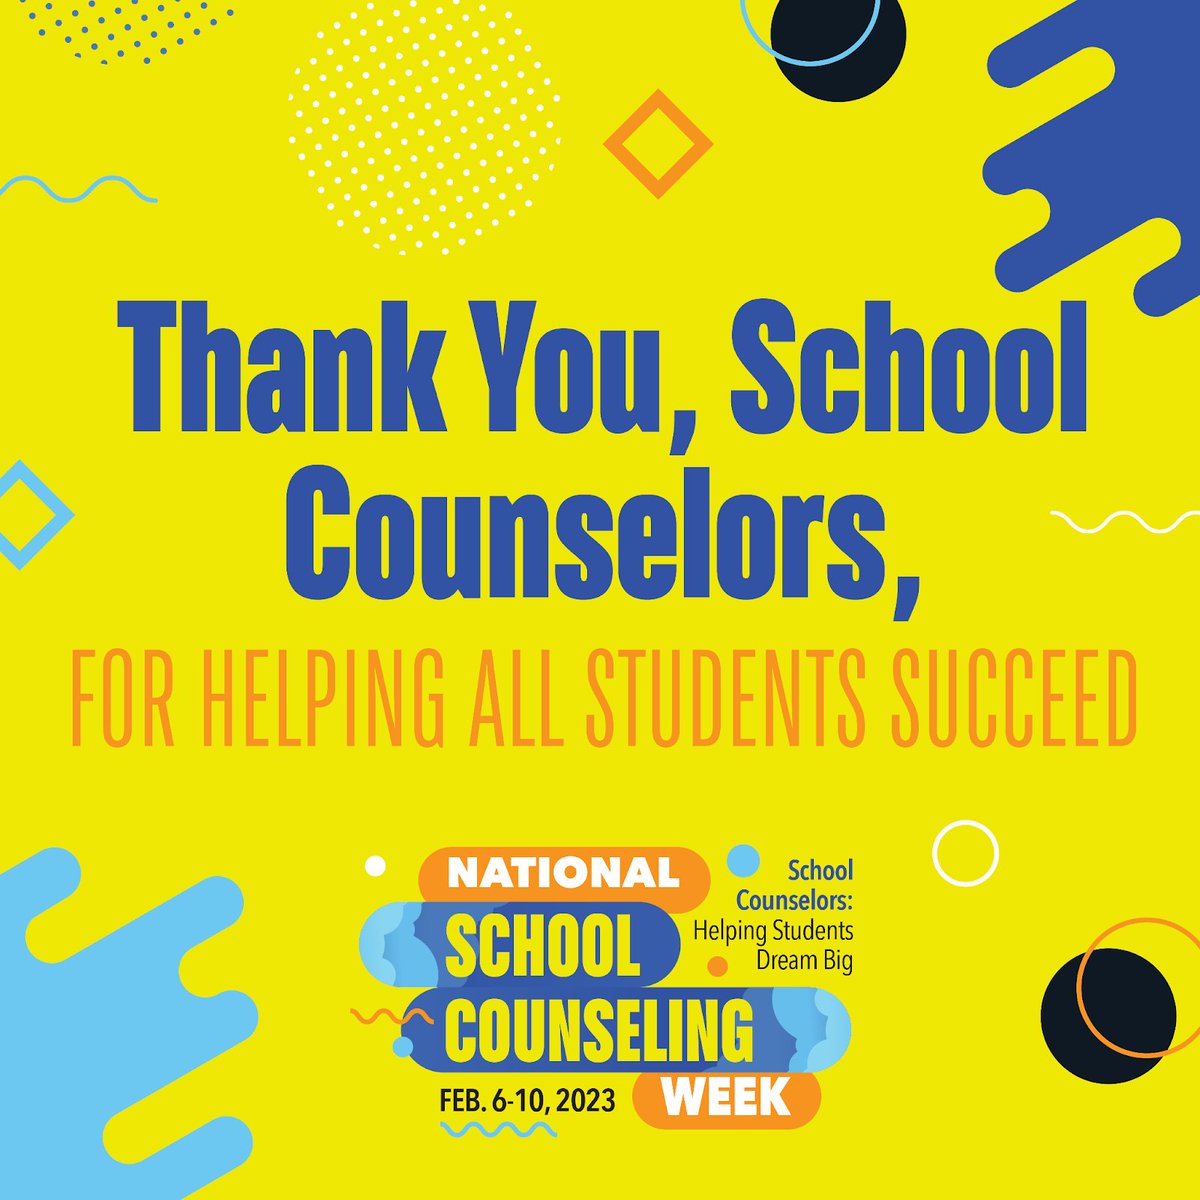 @MCPS #schoolcounselors, thank you for everything you do to support students, staff, families, and the community! Don’t forget that the EAP is also here to support you! #mcpsstaffwellness #NSCW23